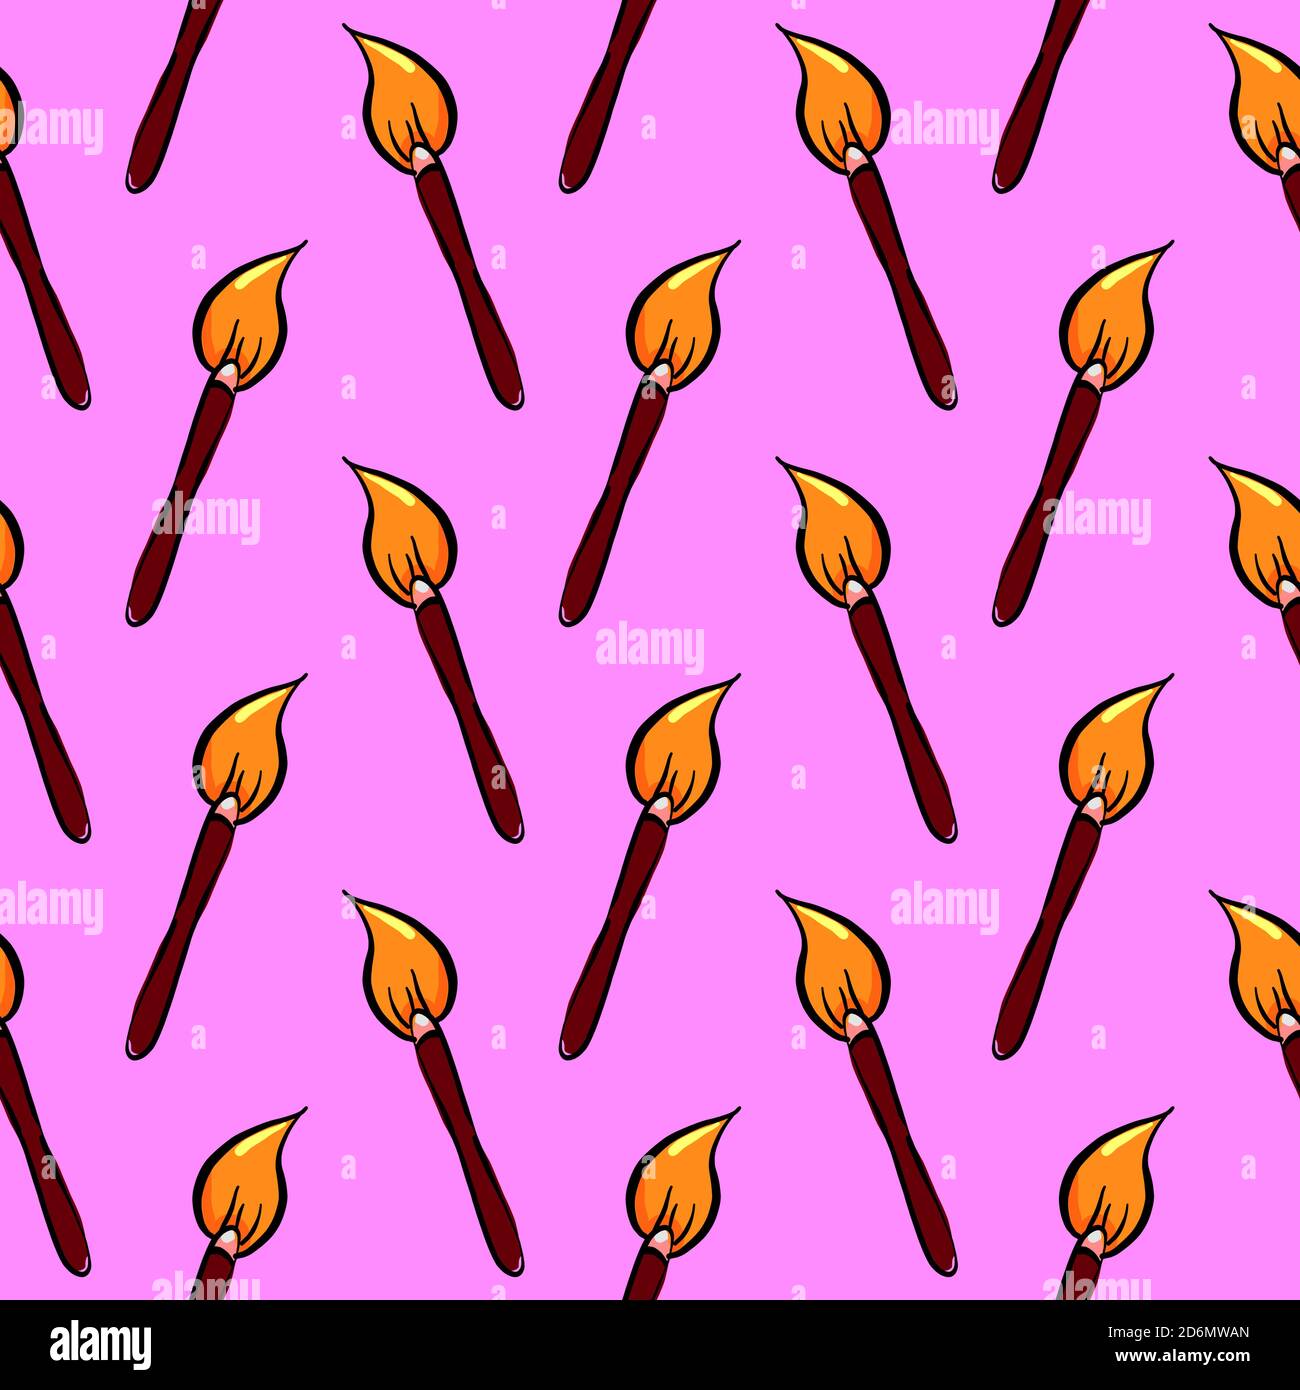 Paint brushes, seamless pattern on pink background. Stock Vector